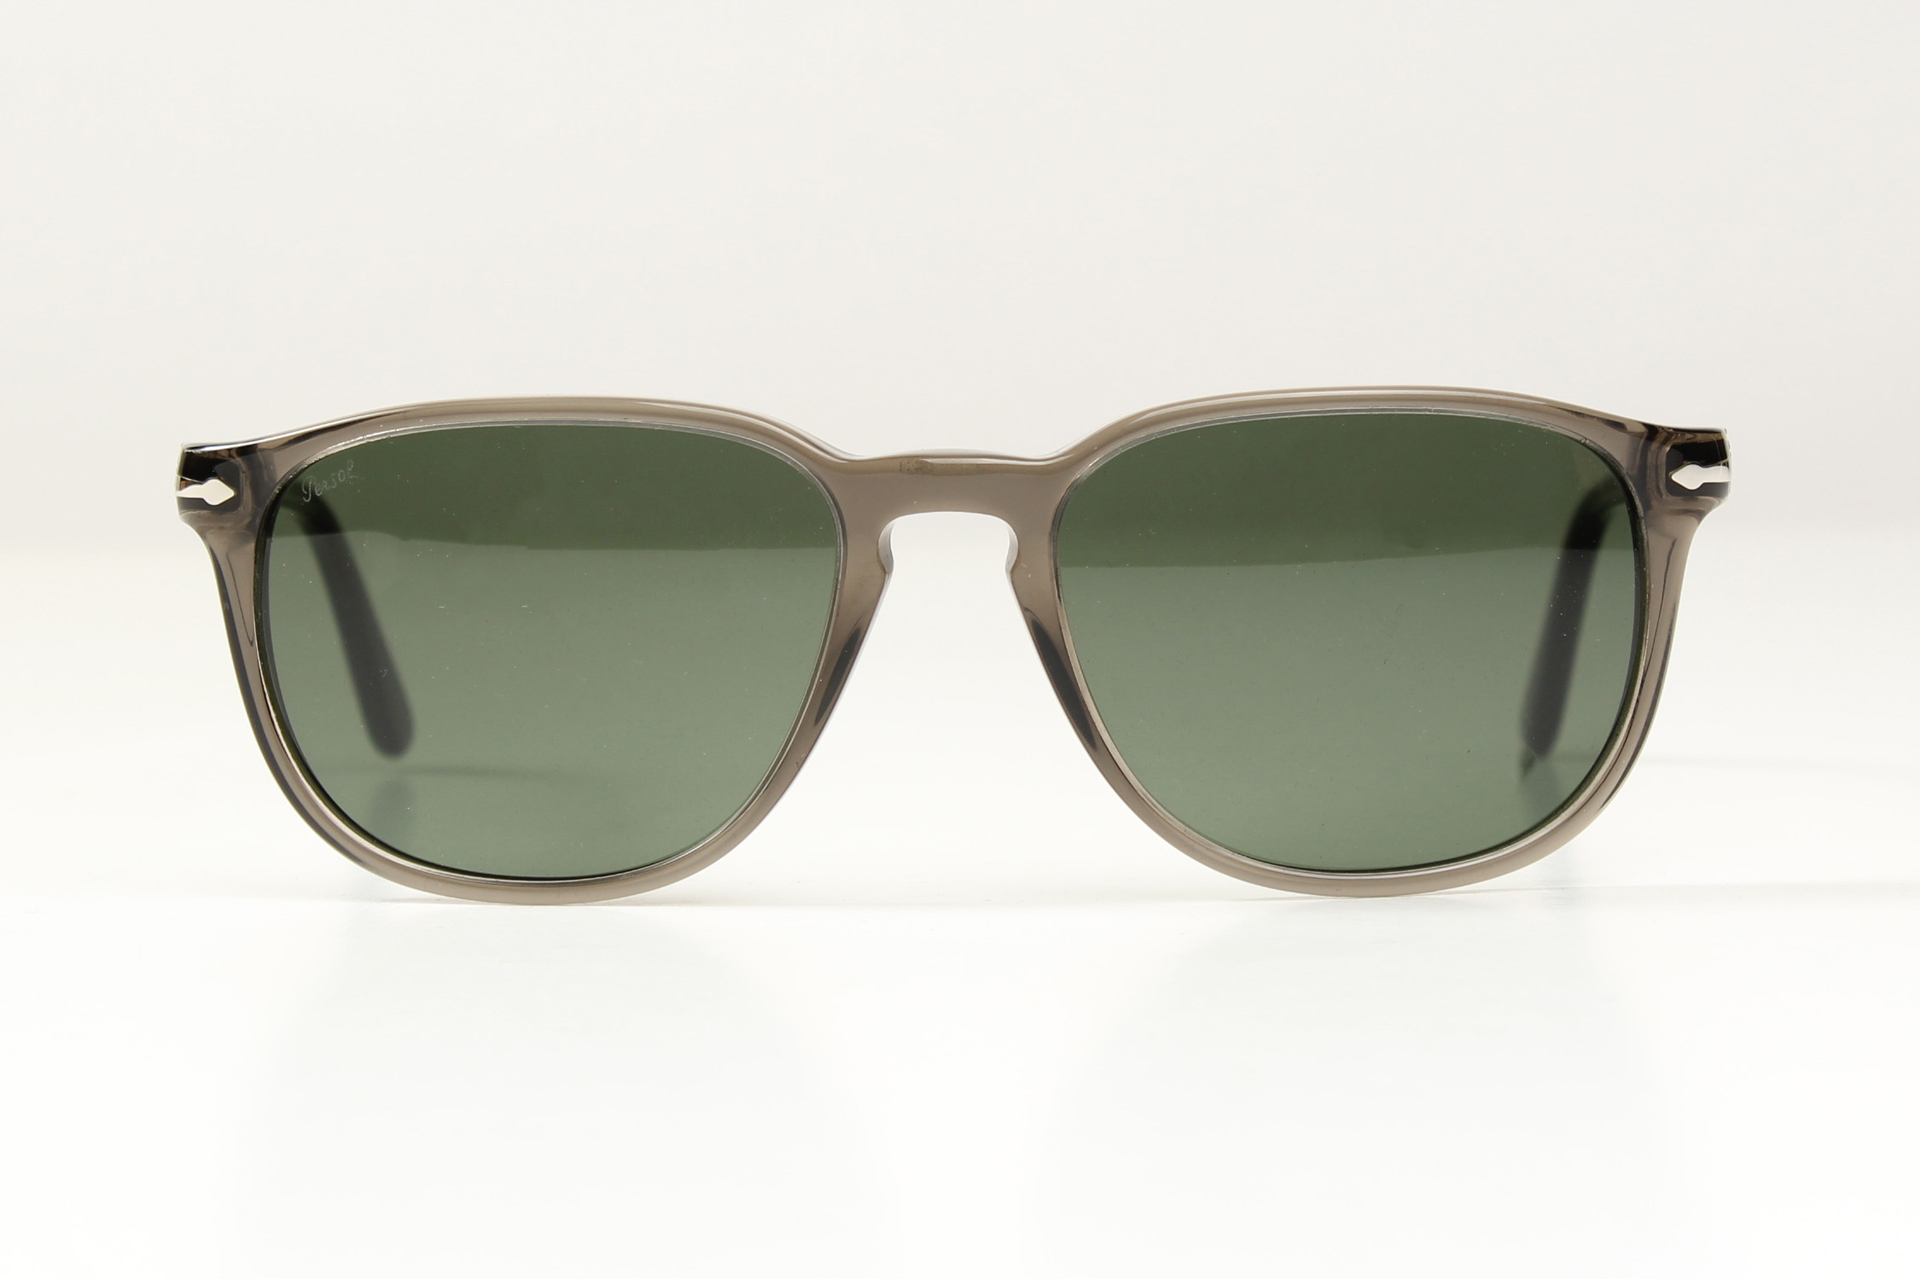 Persol 3019-S 1103/31